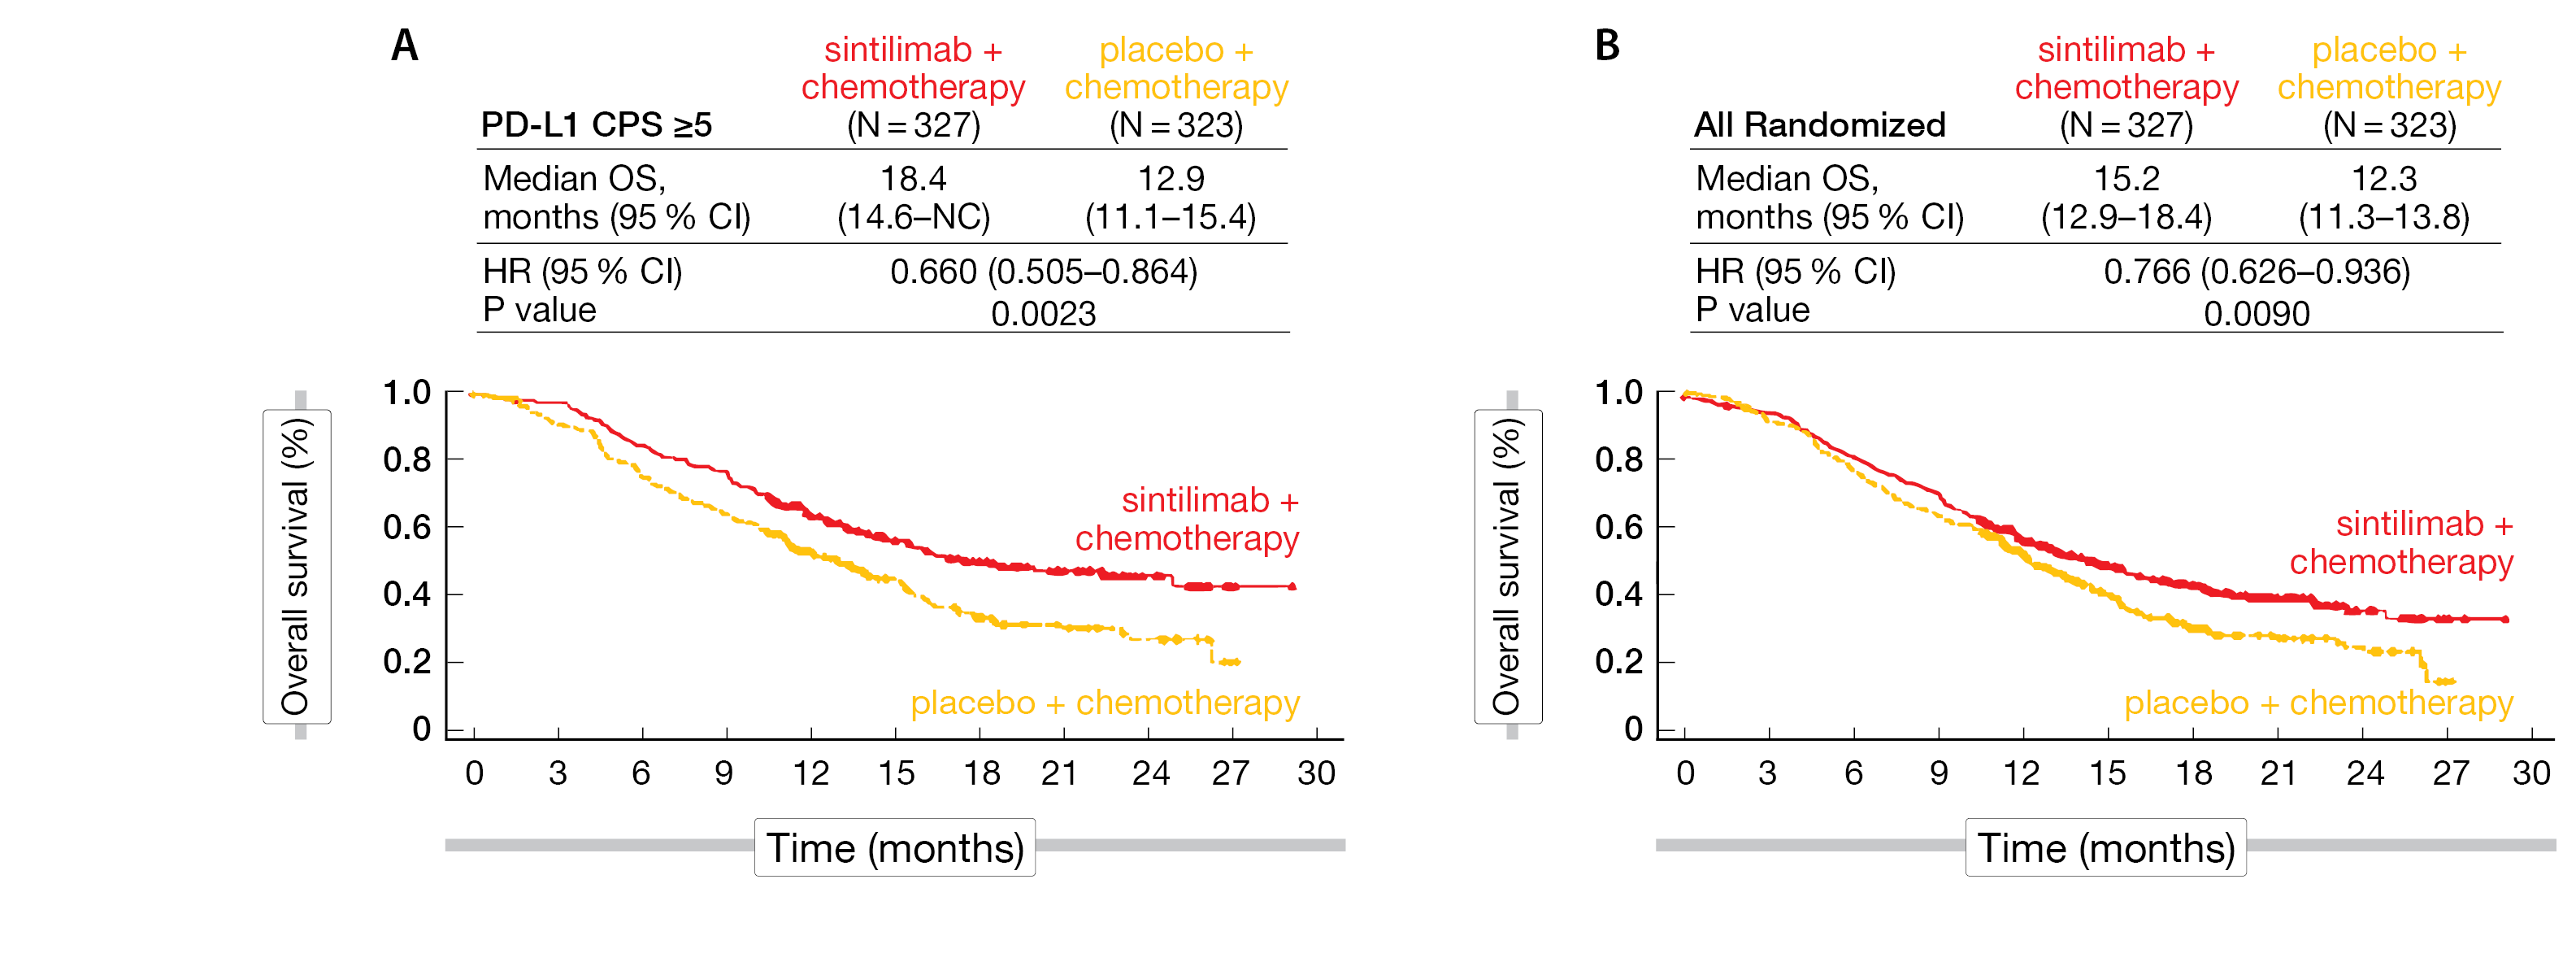 Figure 2: Superior OS benefit with sintilimab plus chemotherapy in PD-L1 CPS ≥5 (A) and all randomized patients (B).